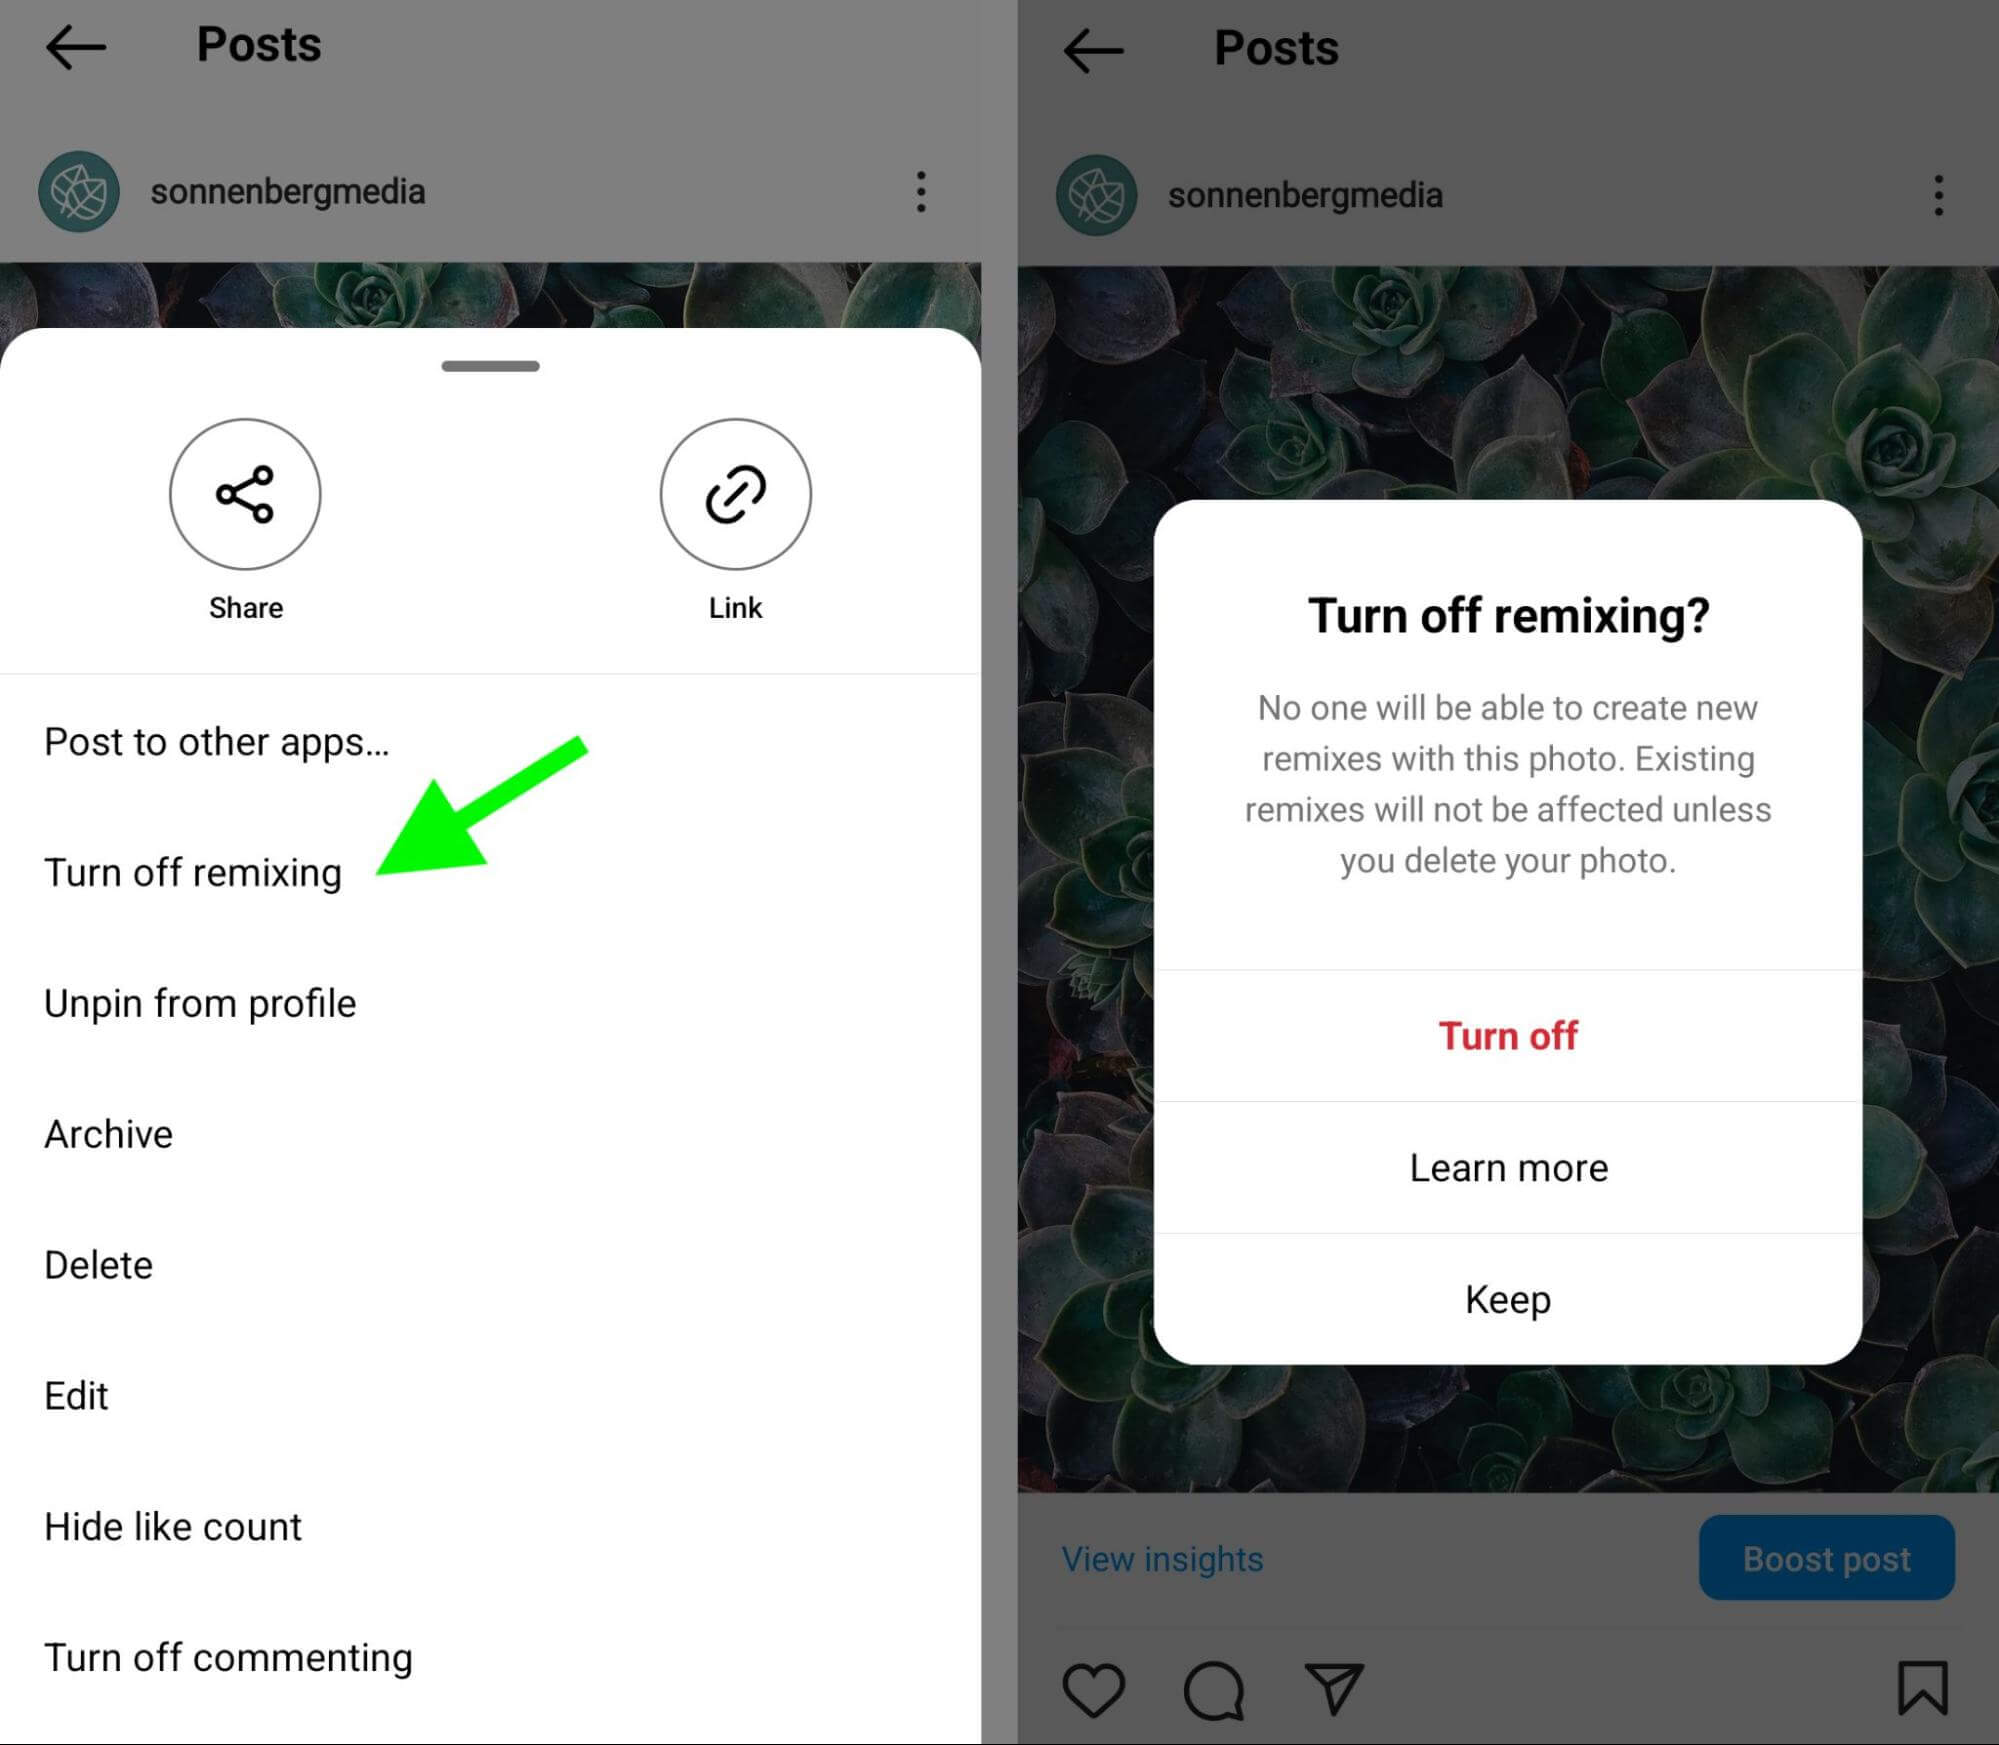 how-to-use-instagram-photo-remix-feature-turn-on-off-post-remixing-step-16